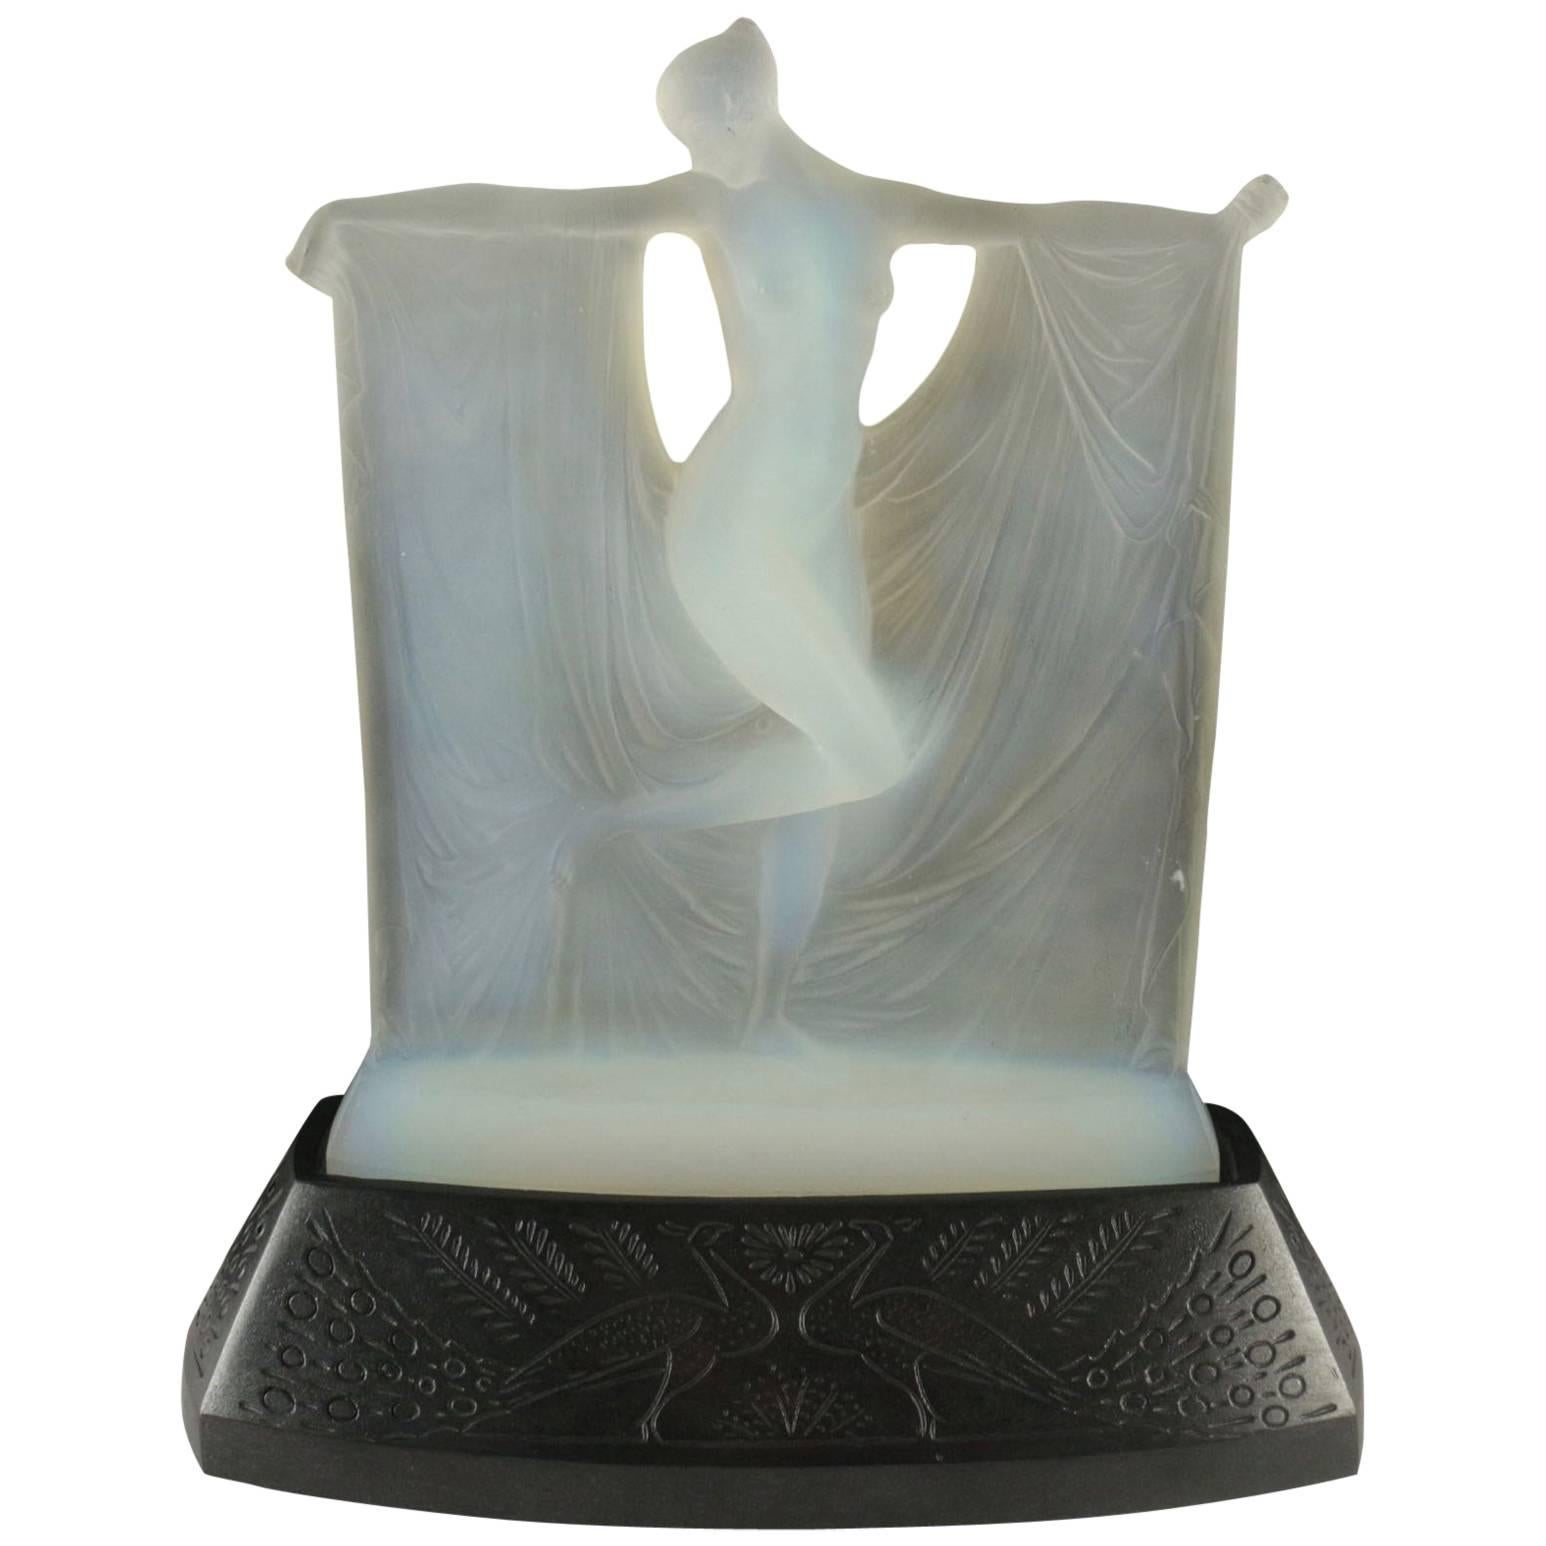 R. Lalique
Opalescent glass statuette, by René Lalique, moulded as a maiden amidst drapery held by her outstretched arms, signature to rear of the figure above base, moulded in relief, R.Lalique.
A fine blue/white opalescent glass statuette, by